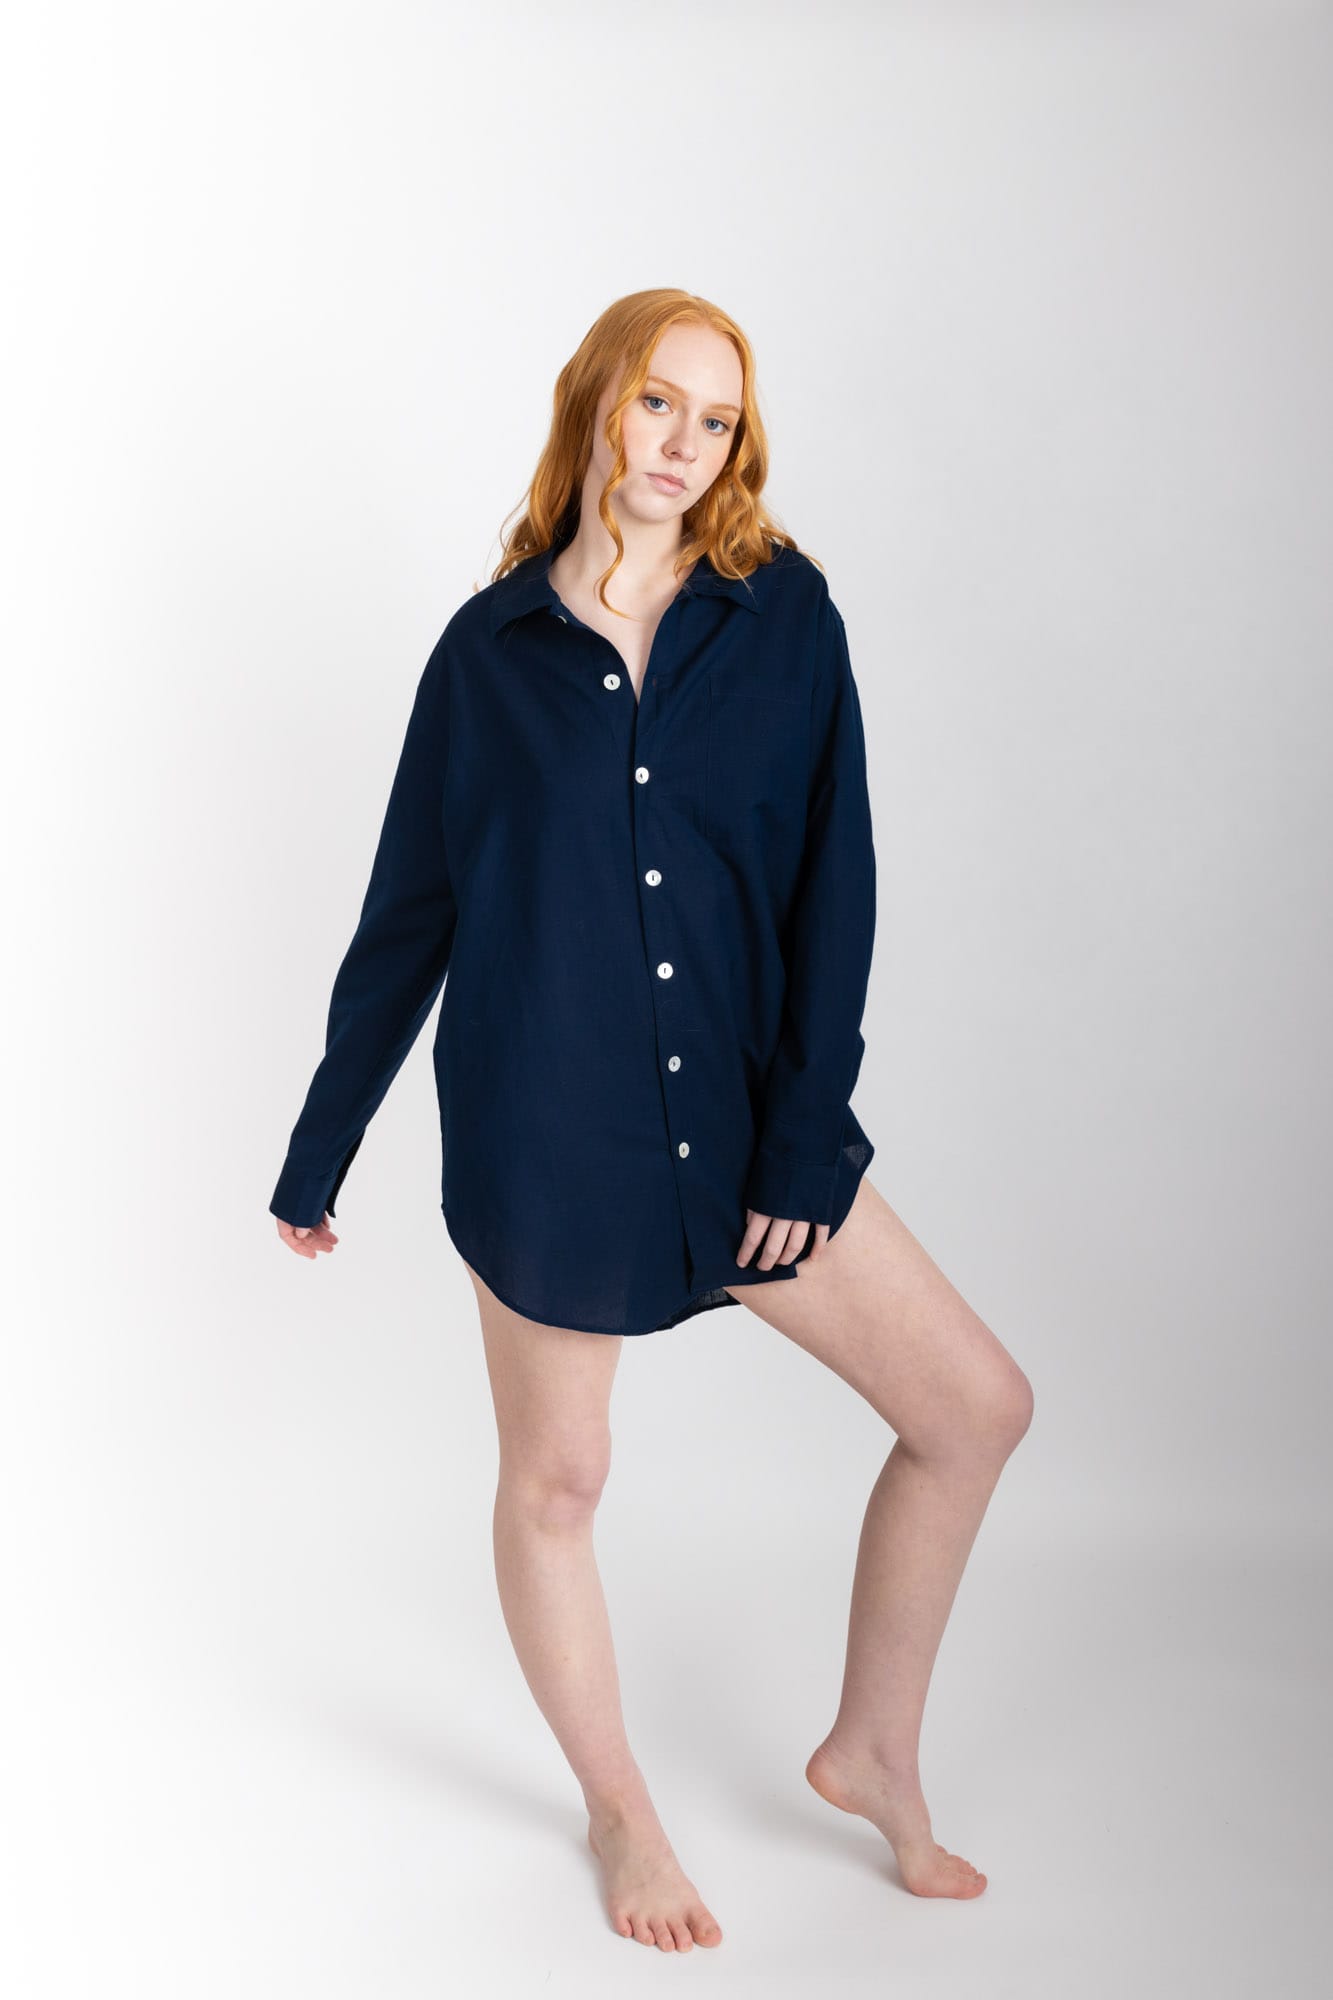 A classic man style shirt silhouette, lengthened, with a rounded hem and buttoned cuff. Featuring a single breast pocket, back box pleat and locker loop detail, and natural shell buttons.  In navy, and made from a blend of 55% organic cotton 45% linen, this shirt is finished with French seams.